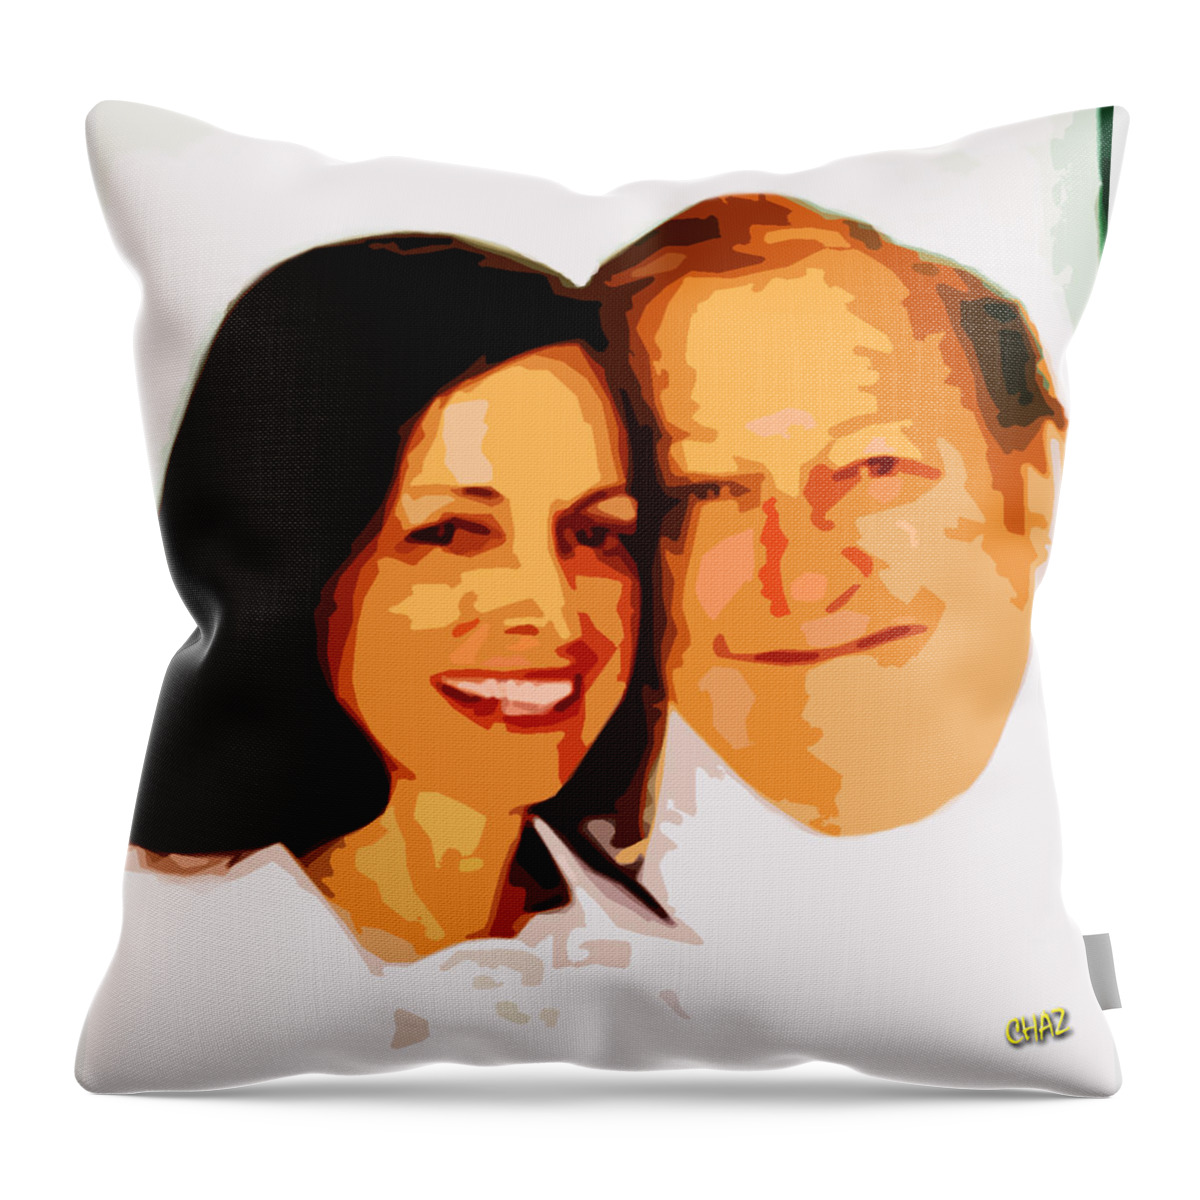 Happiness Throw Pillow featuring the painting Happy Couple by CHAZ Daugherty